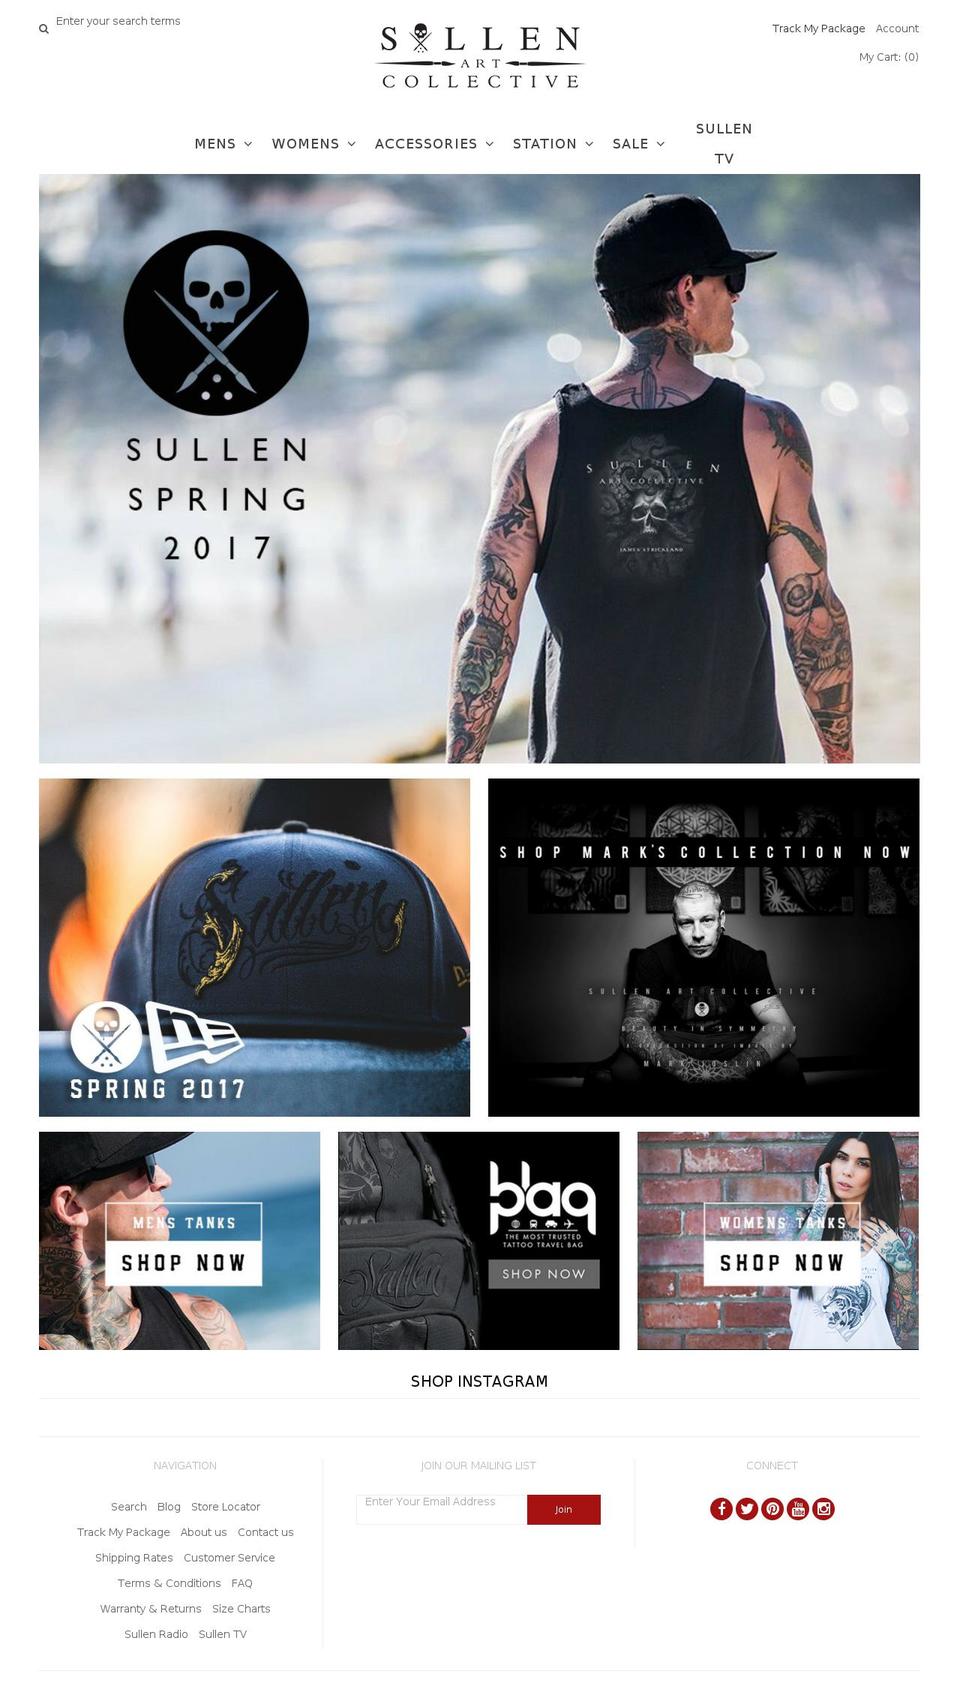 Tailor Shopify theme site example sullenclothing.com